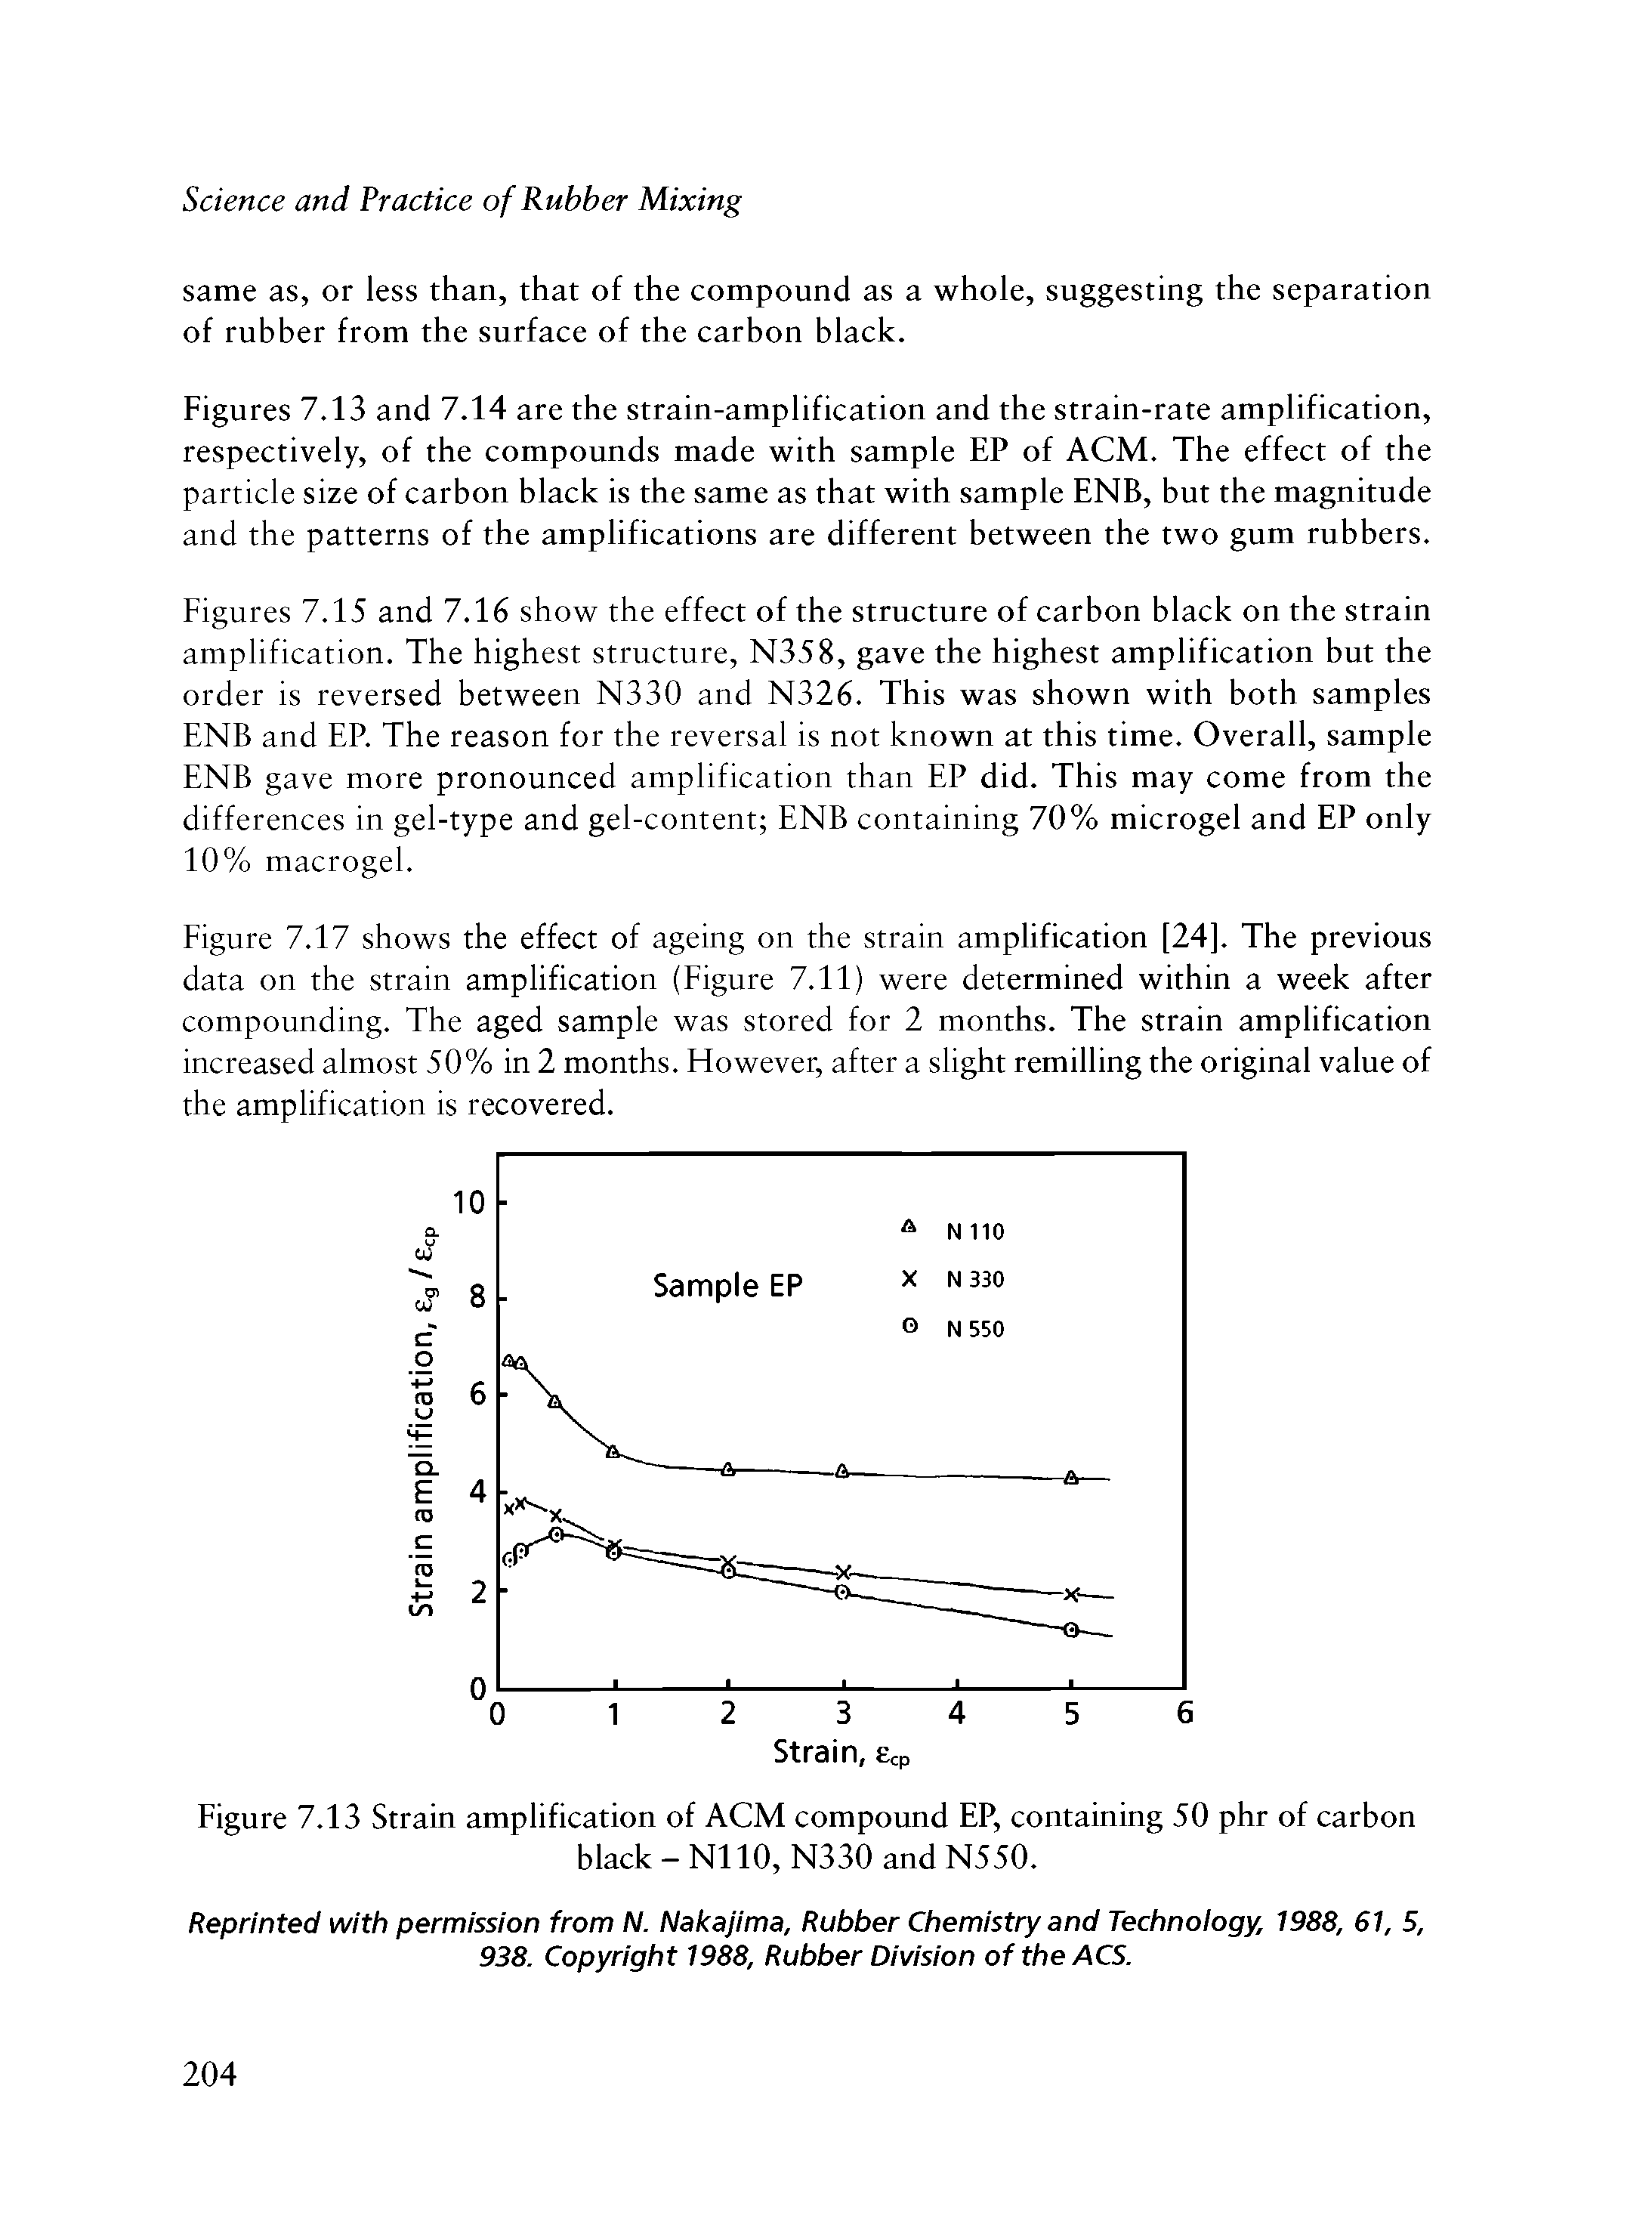 Figures 7.13 and 7.14 are the strain-amplification and the strain-rate amplification, respectively, of the compounds made with sample EP of ACM. The effect of the particle size of carbon black is the same as that with sample ENB, but the magnitude and the patterns of the amplifications are different between the two gum rubbers.